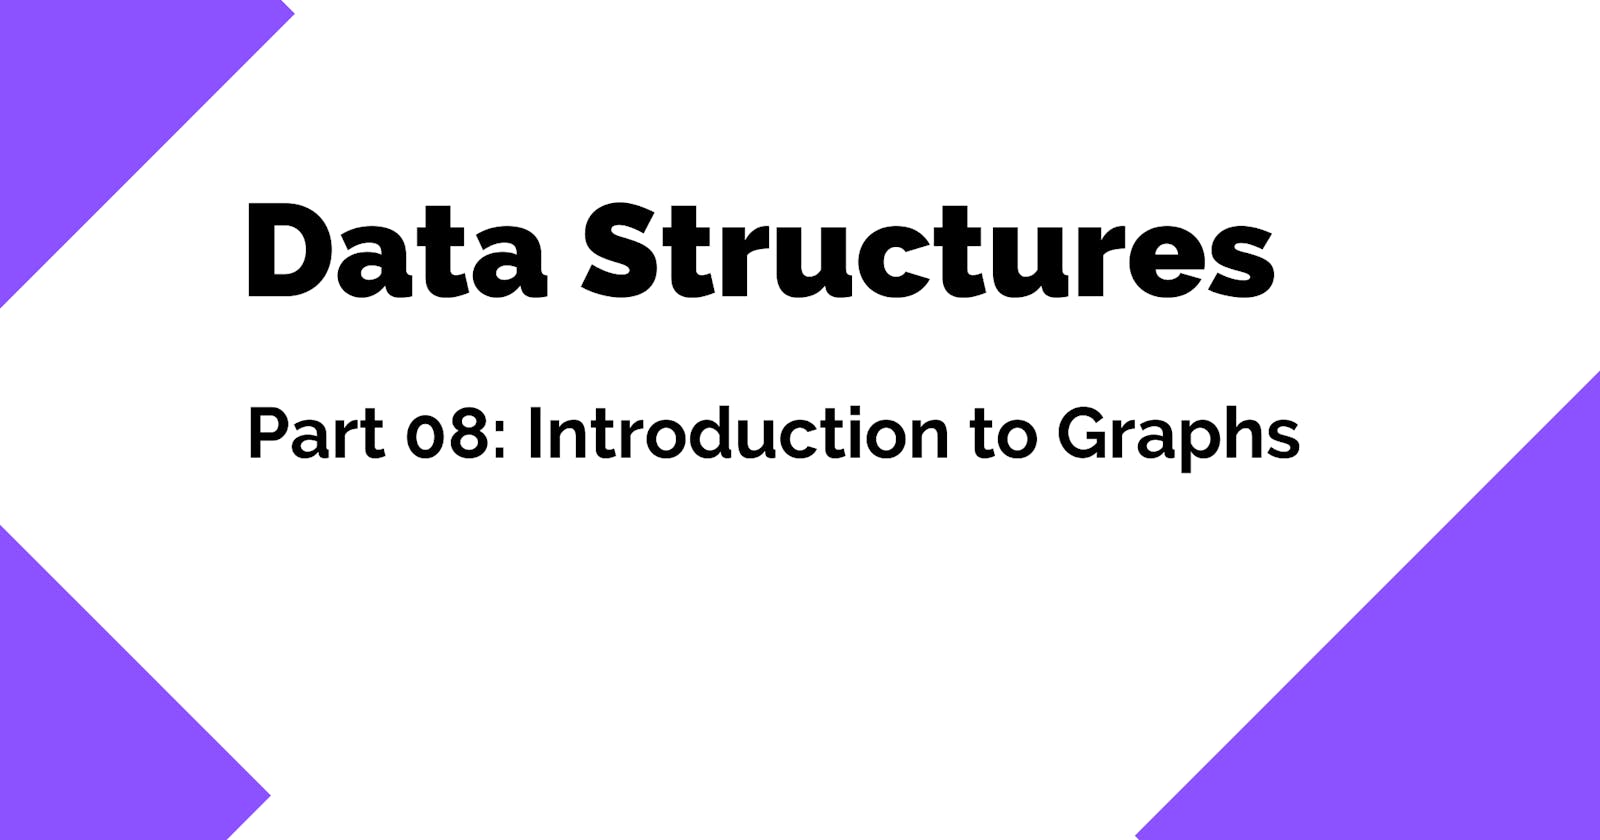 Data Structures 101: Introduction To Graphs